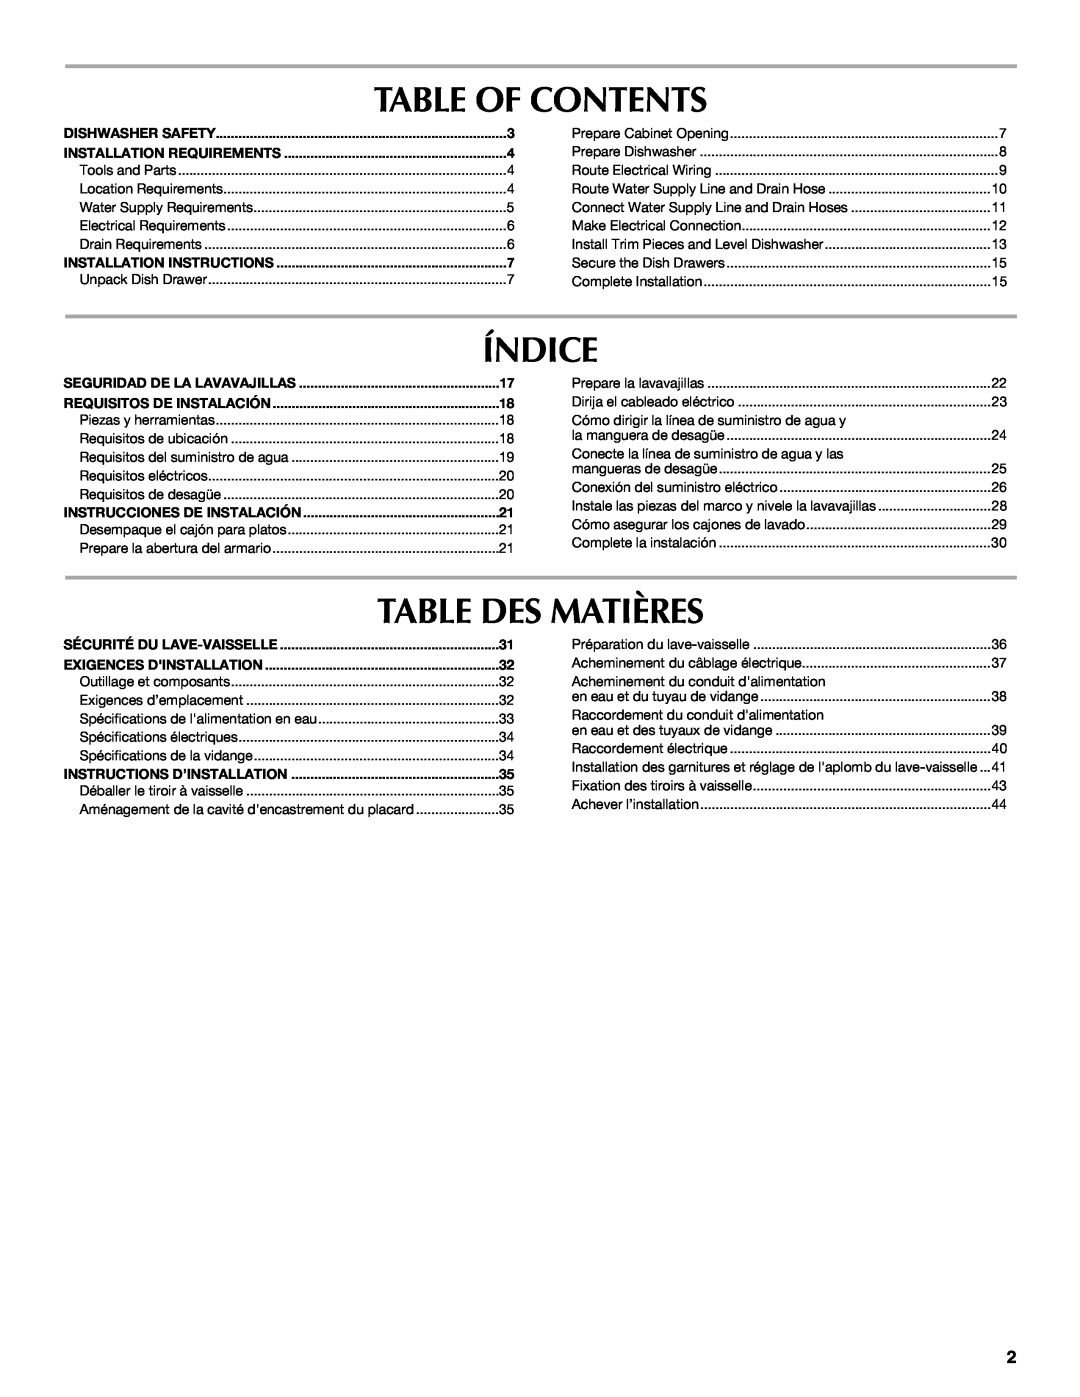 Maytag W10185071B installation instructions Table Of Contents, Índice, Table Des Matières 